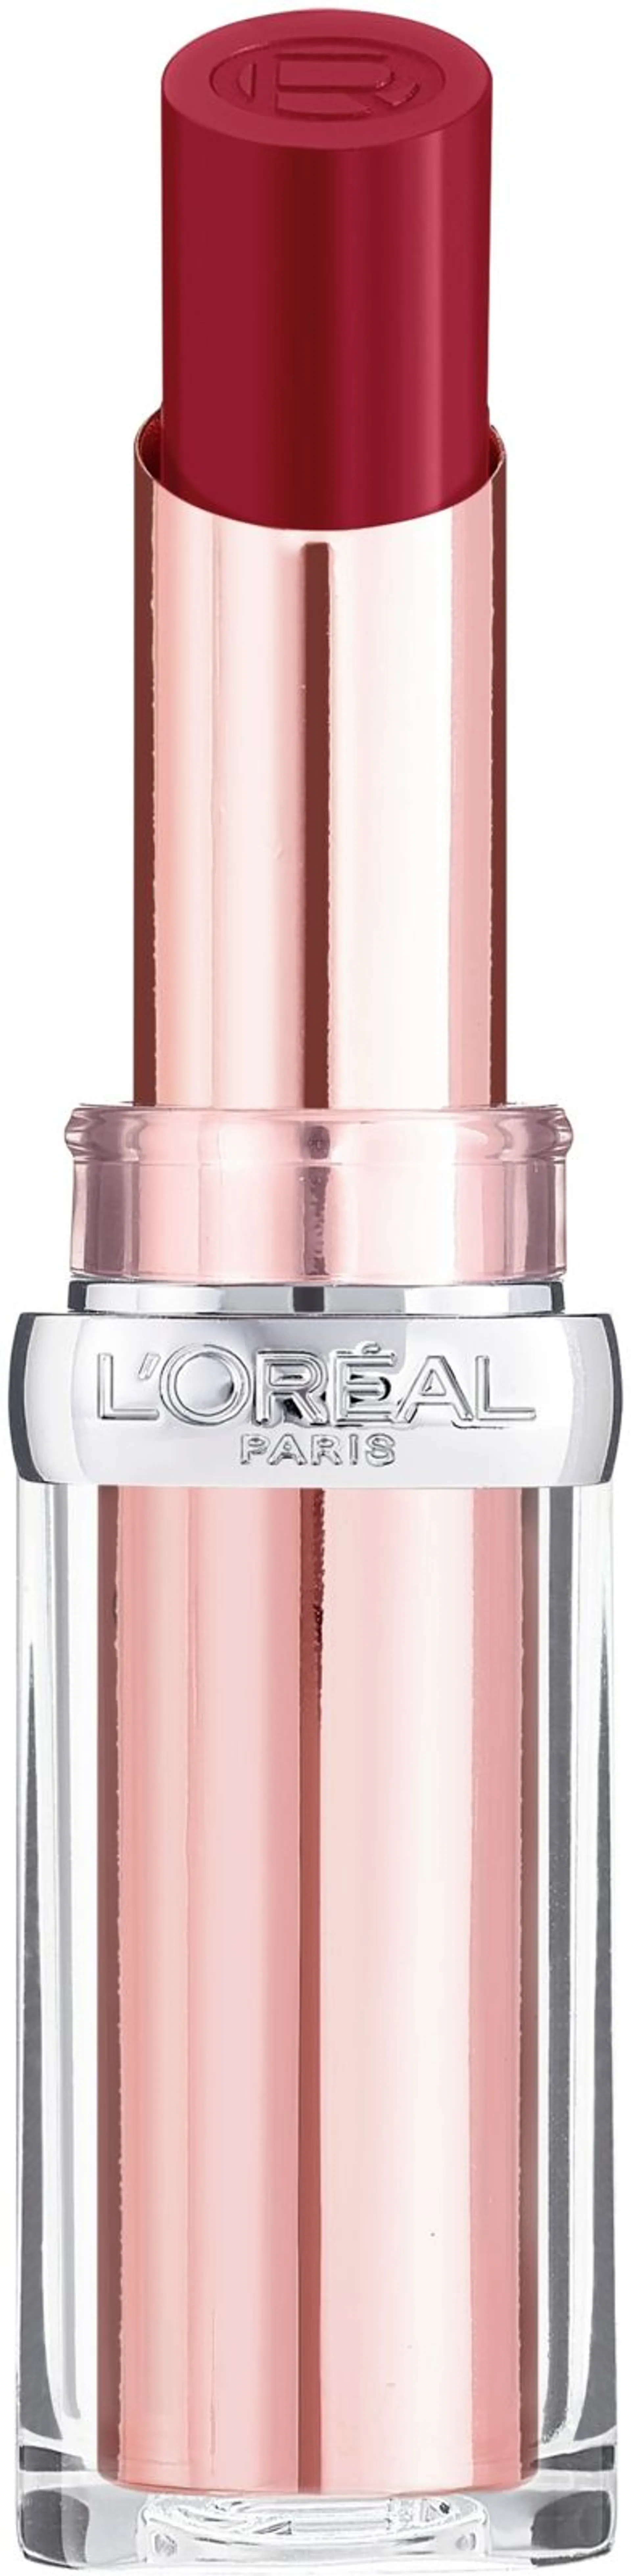 L'Oréal Paris Glow Paradise Balm-in-Lipstick 353 Mulberry Ecstatic huulipuna 3,8 g - 353 Mulberry Ecstatic - 3